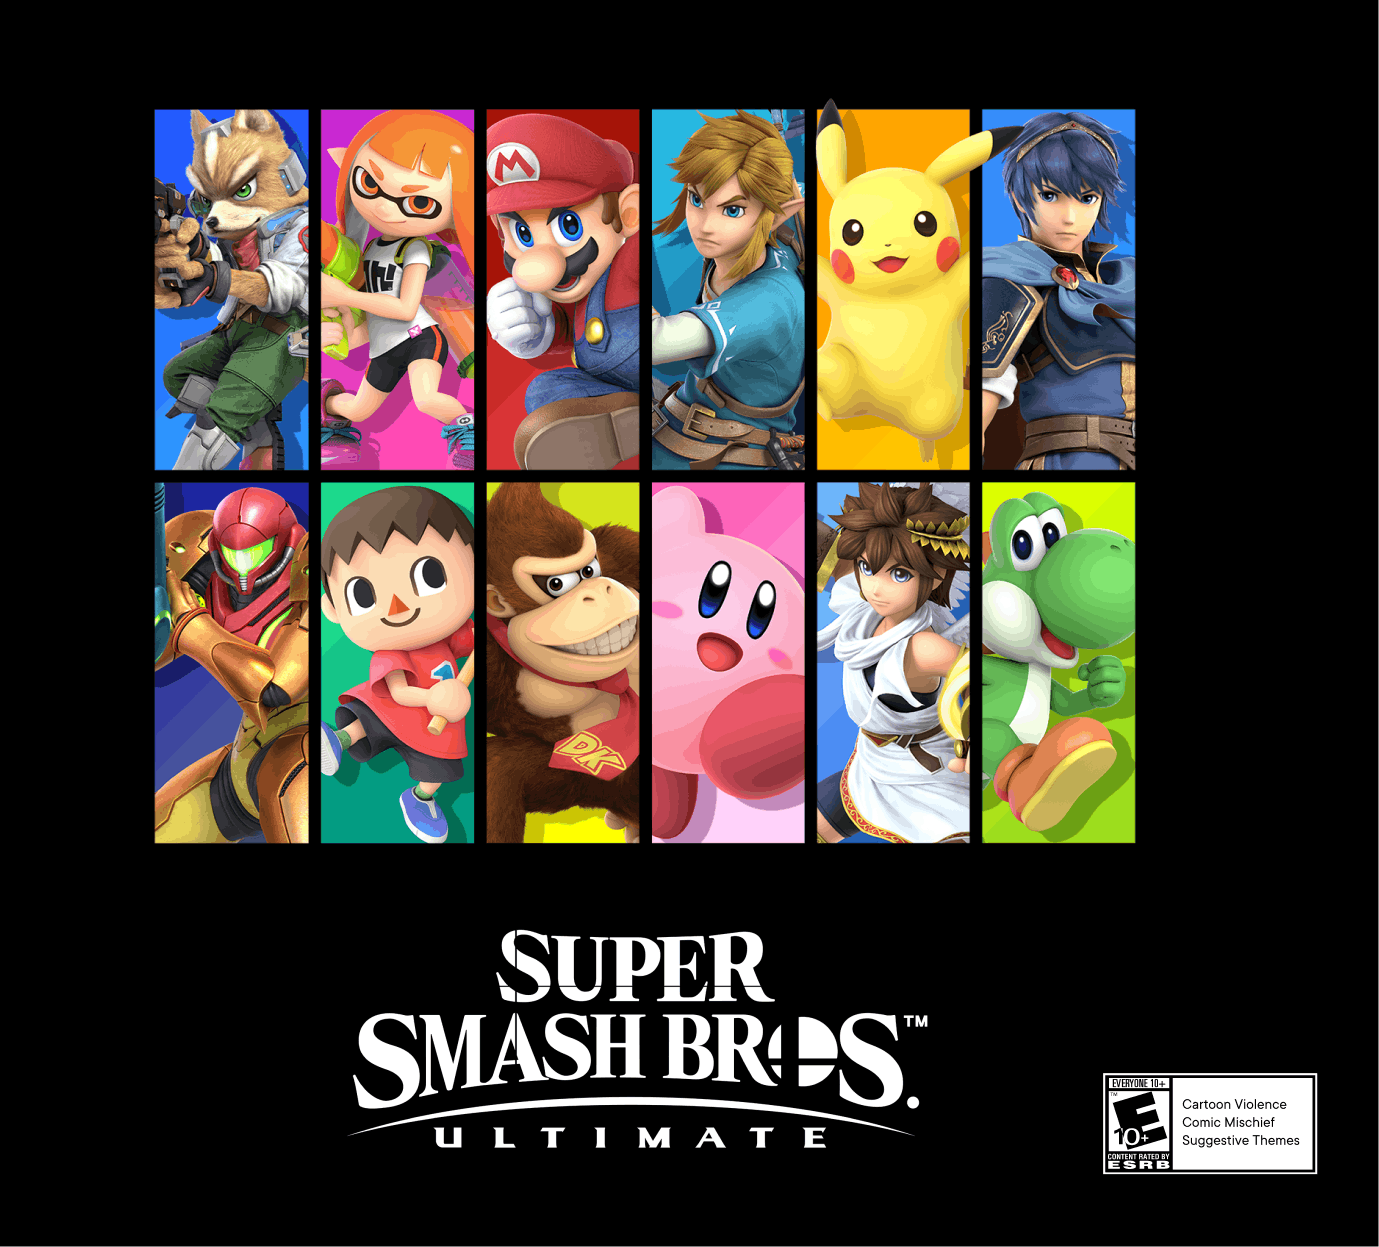 Want a Super Smash Bros PC game? Here are ten fighters to rival